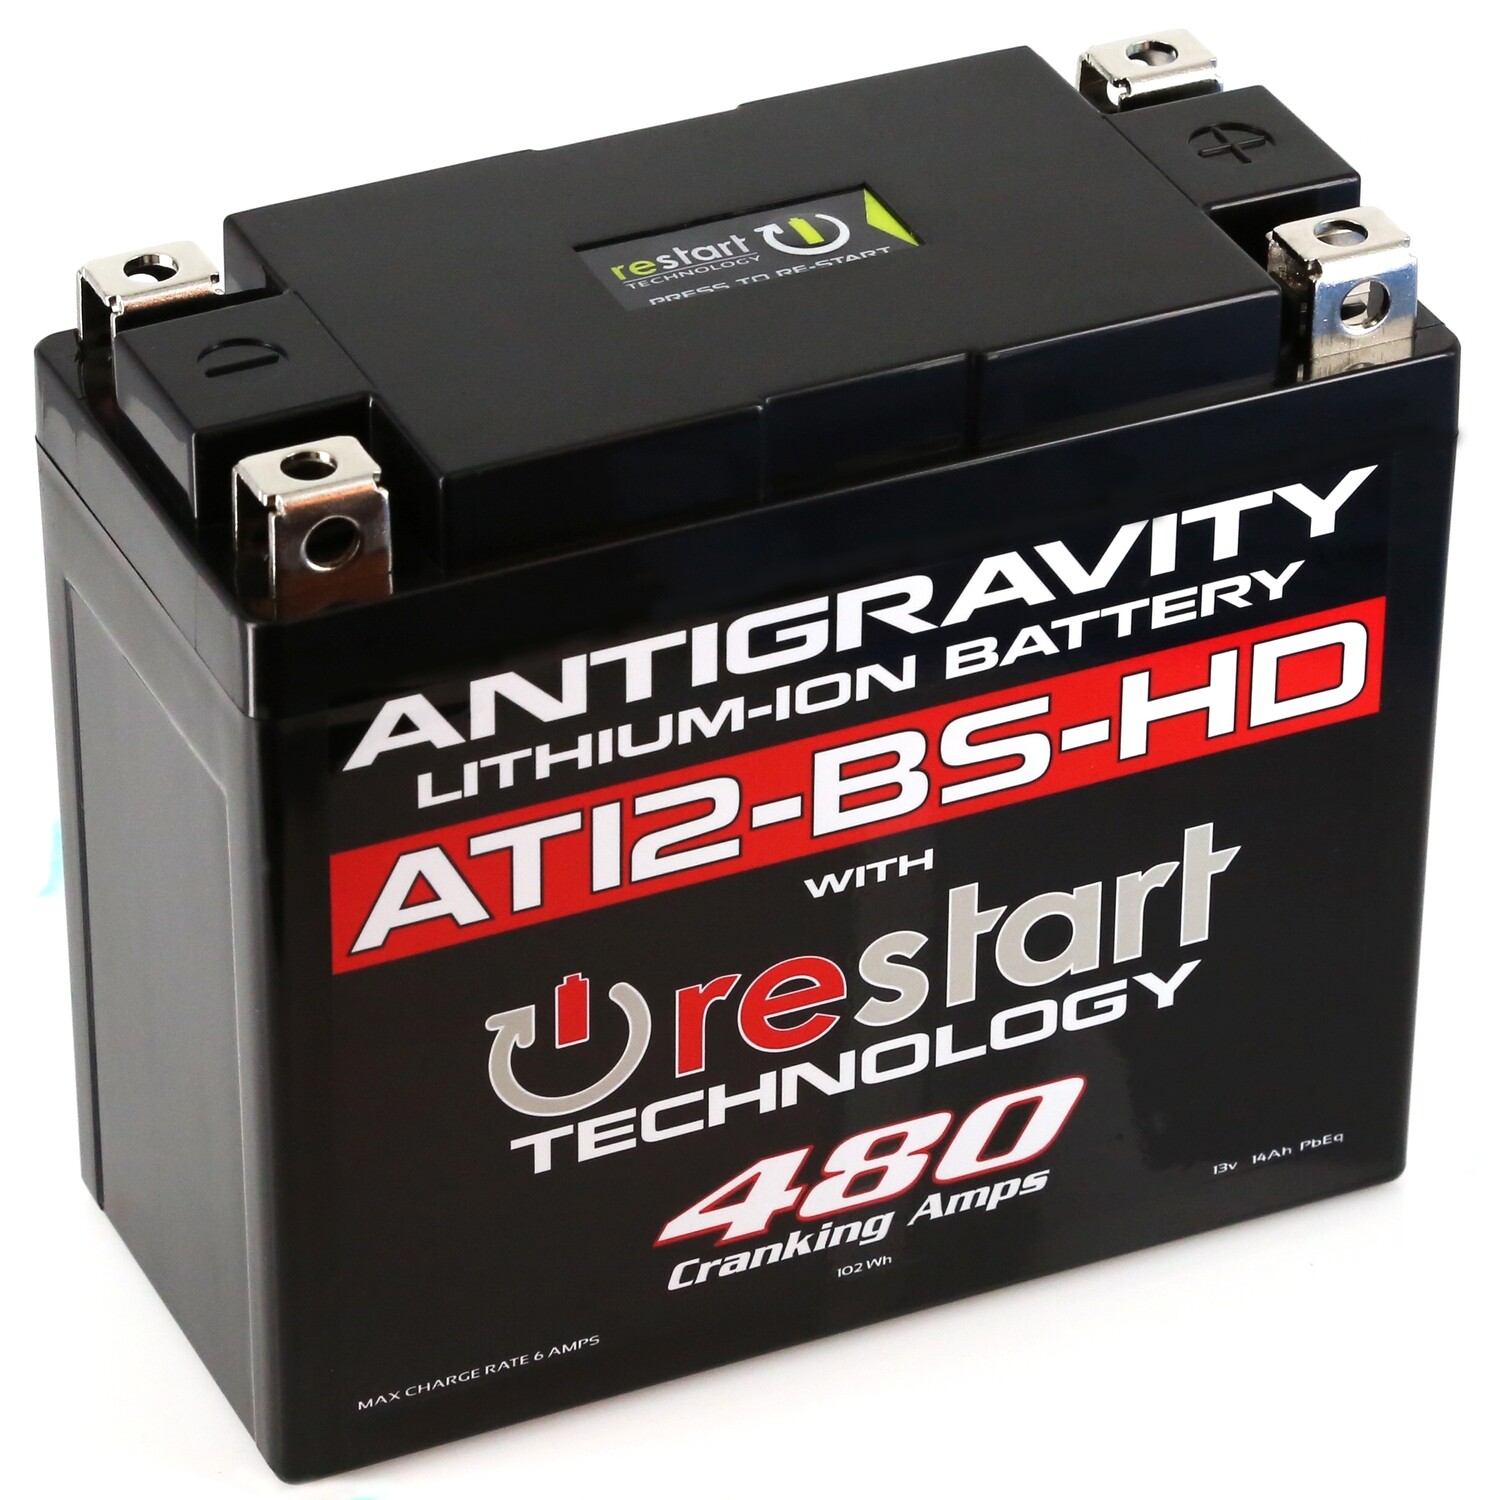 Antigravity Lithium Battery At12bs-hd-rs 480 Ca